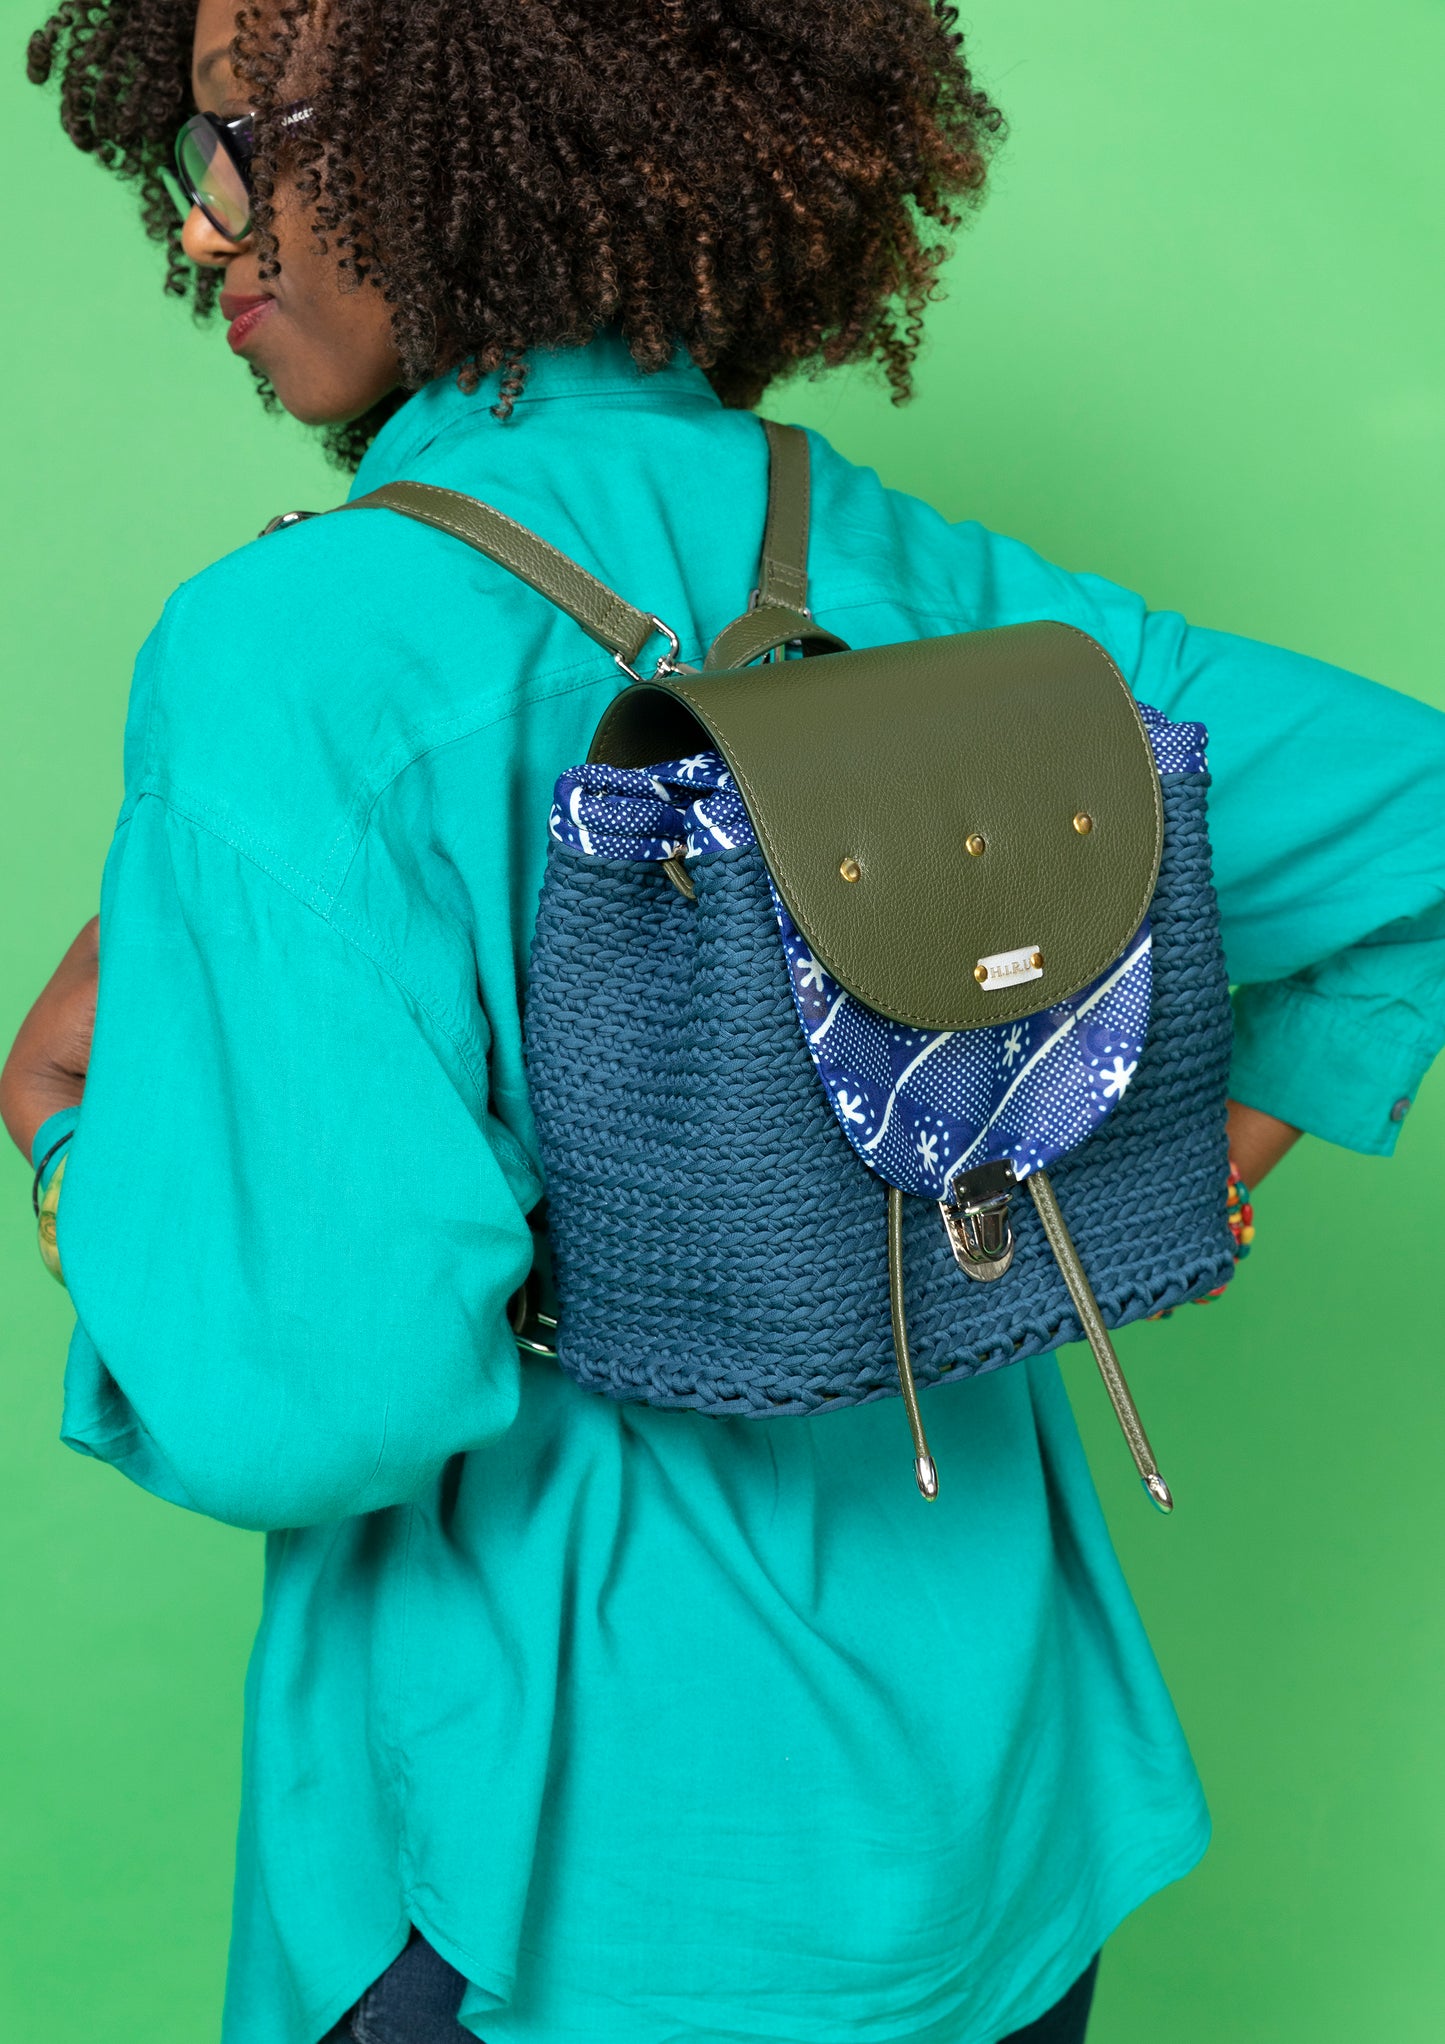 crocheted, dark blue and forest green bag, with an African style print. Model wearing the bag as a backpack, with straps over both shoulders.